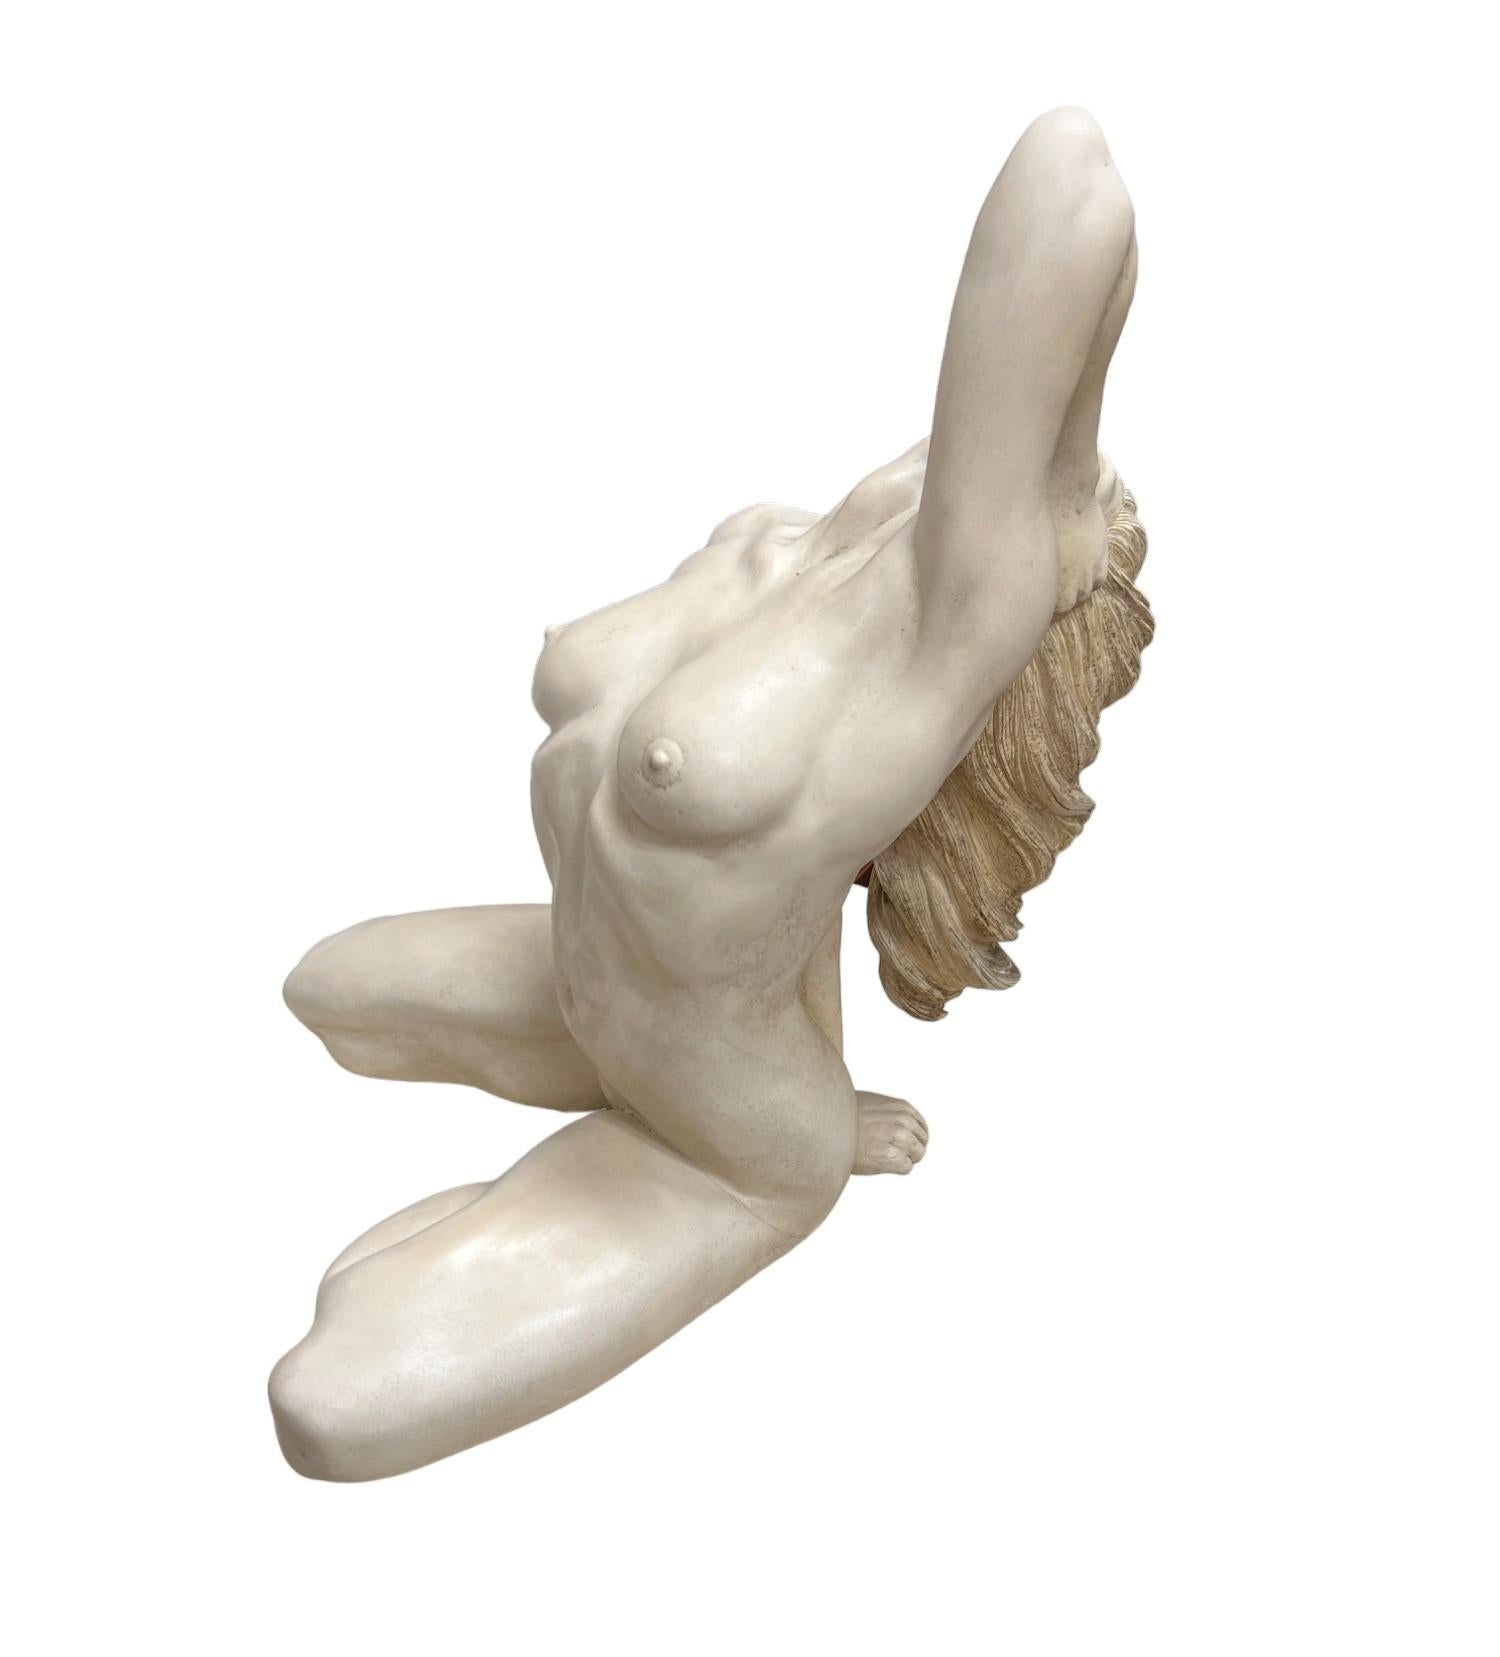 Seated Reclining Nude Female Sculpture In Good Condition For Sale In Palm Beach Gardens, FL